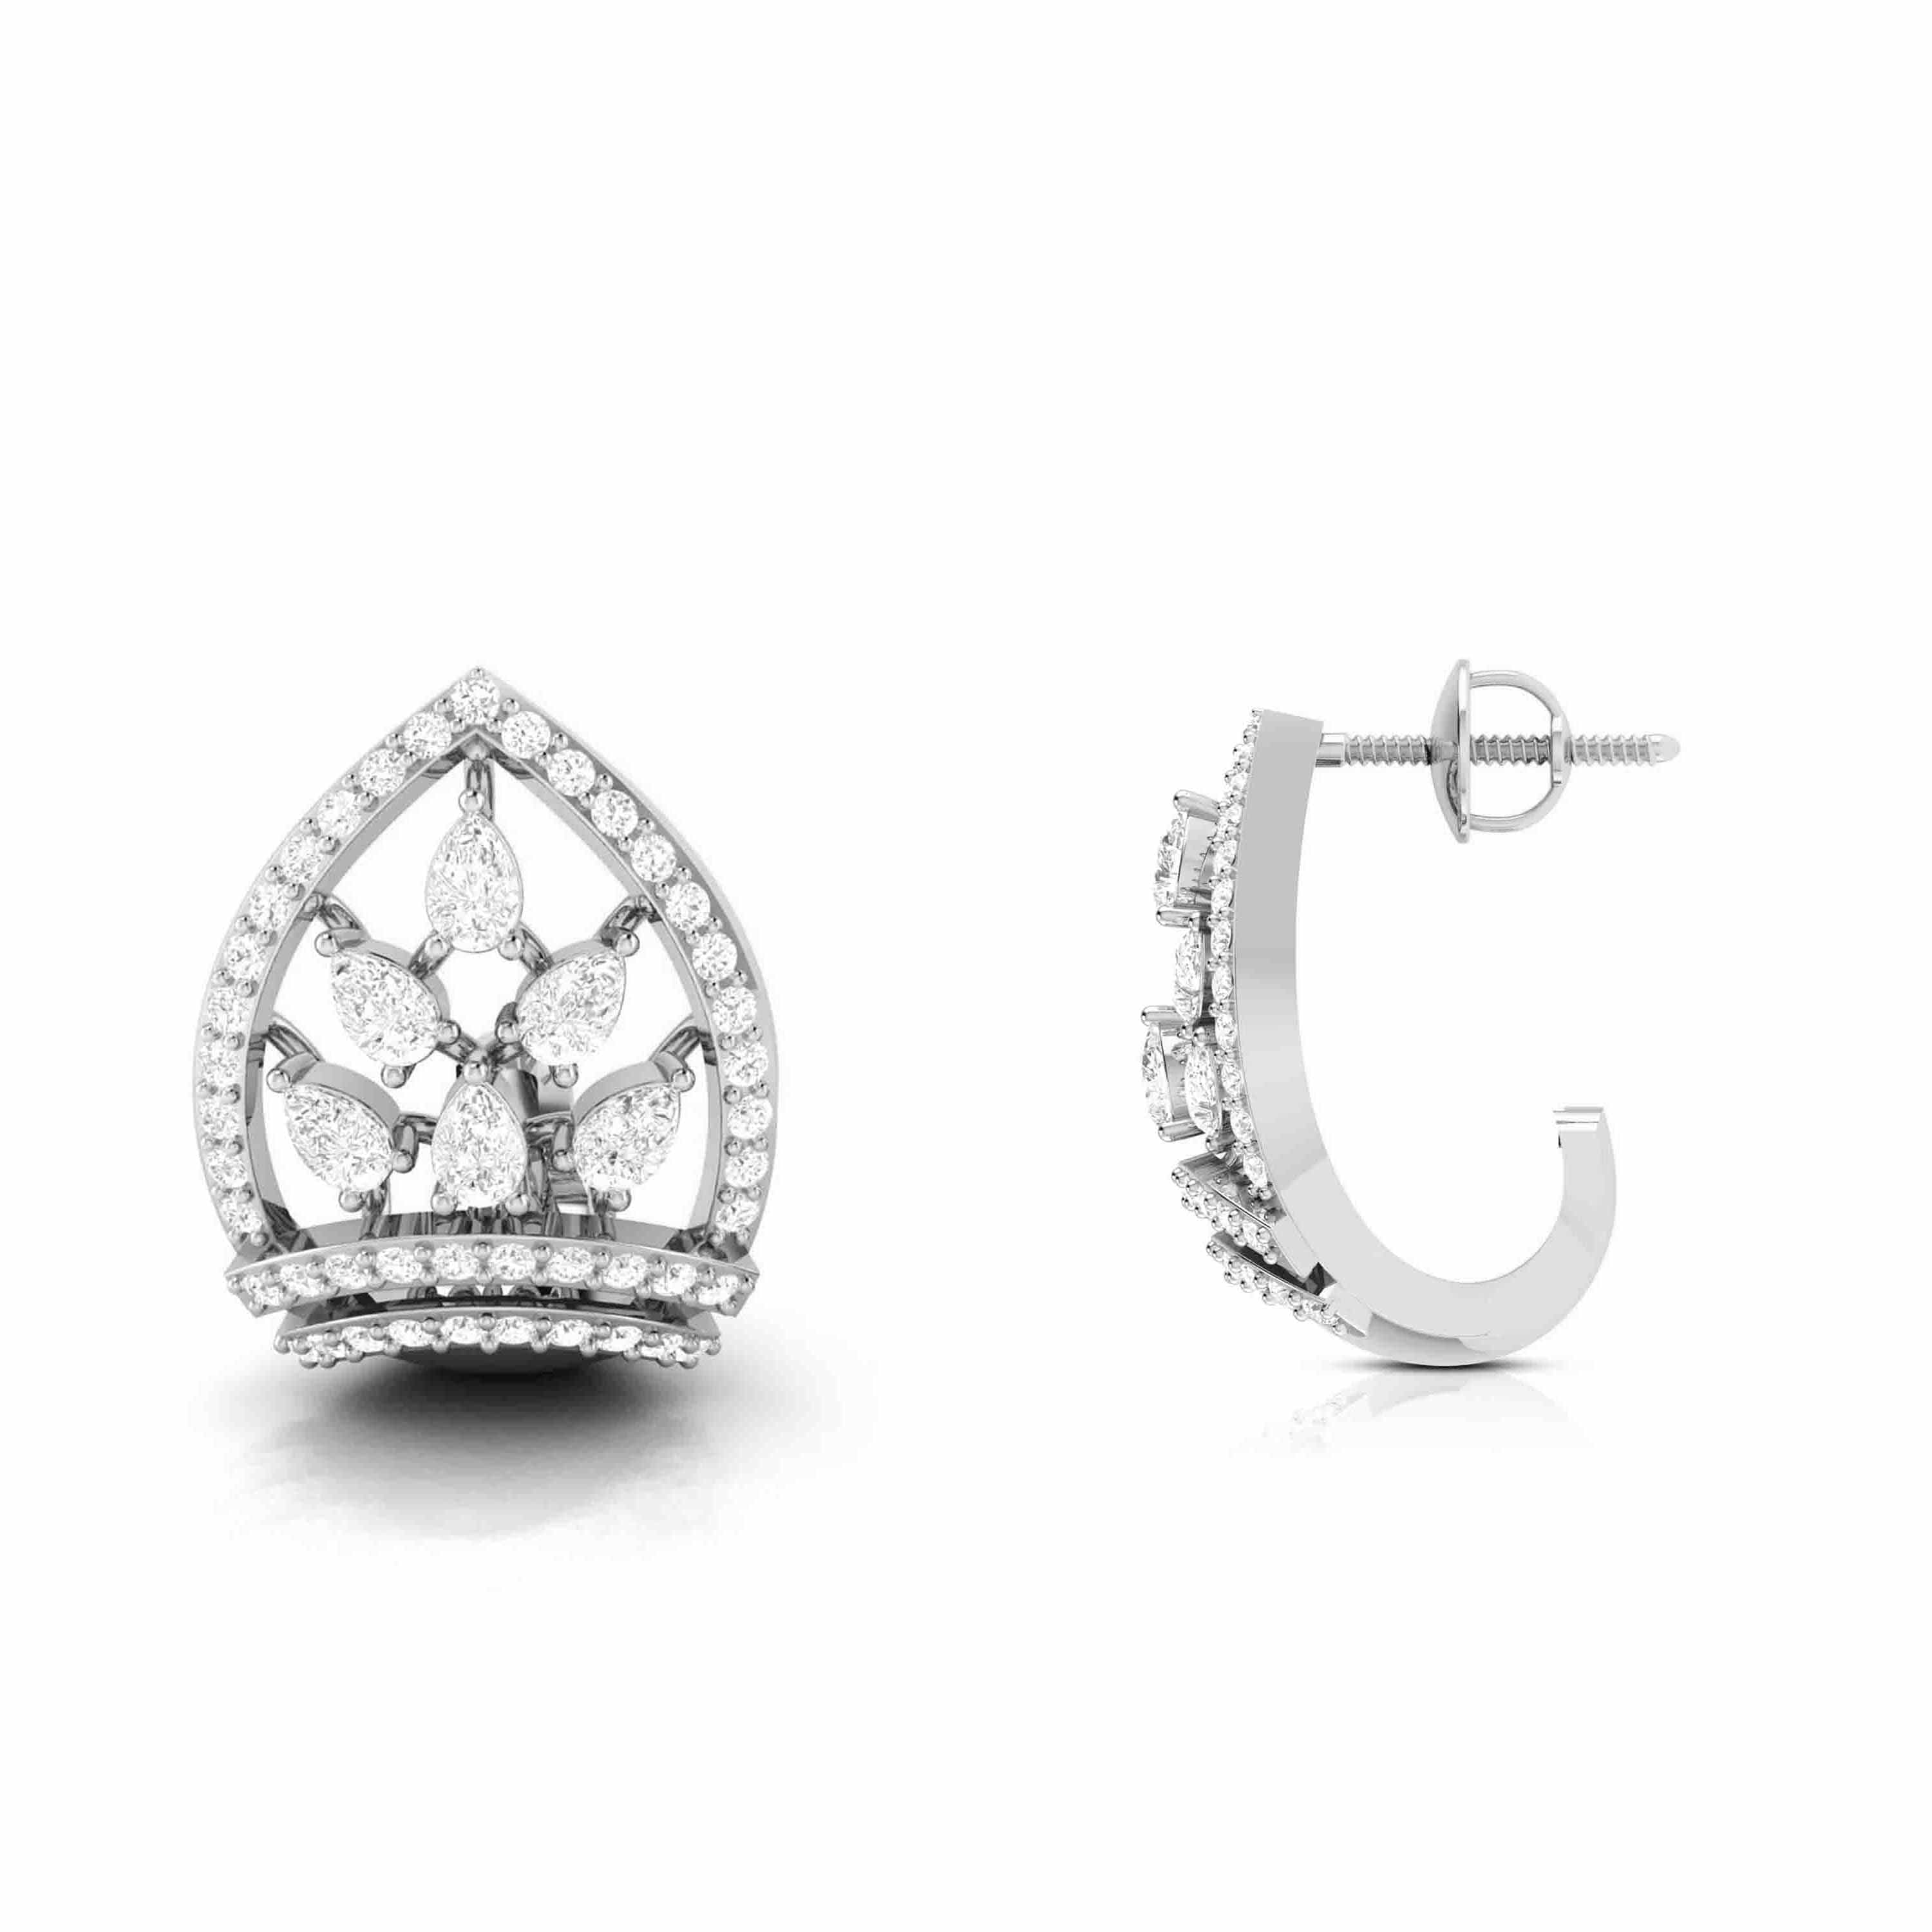 250 Woman Diamond Earrings Stock Photos Pictures  RoyaltyFree Images   iStock